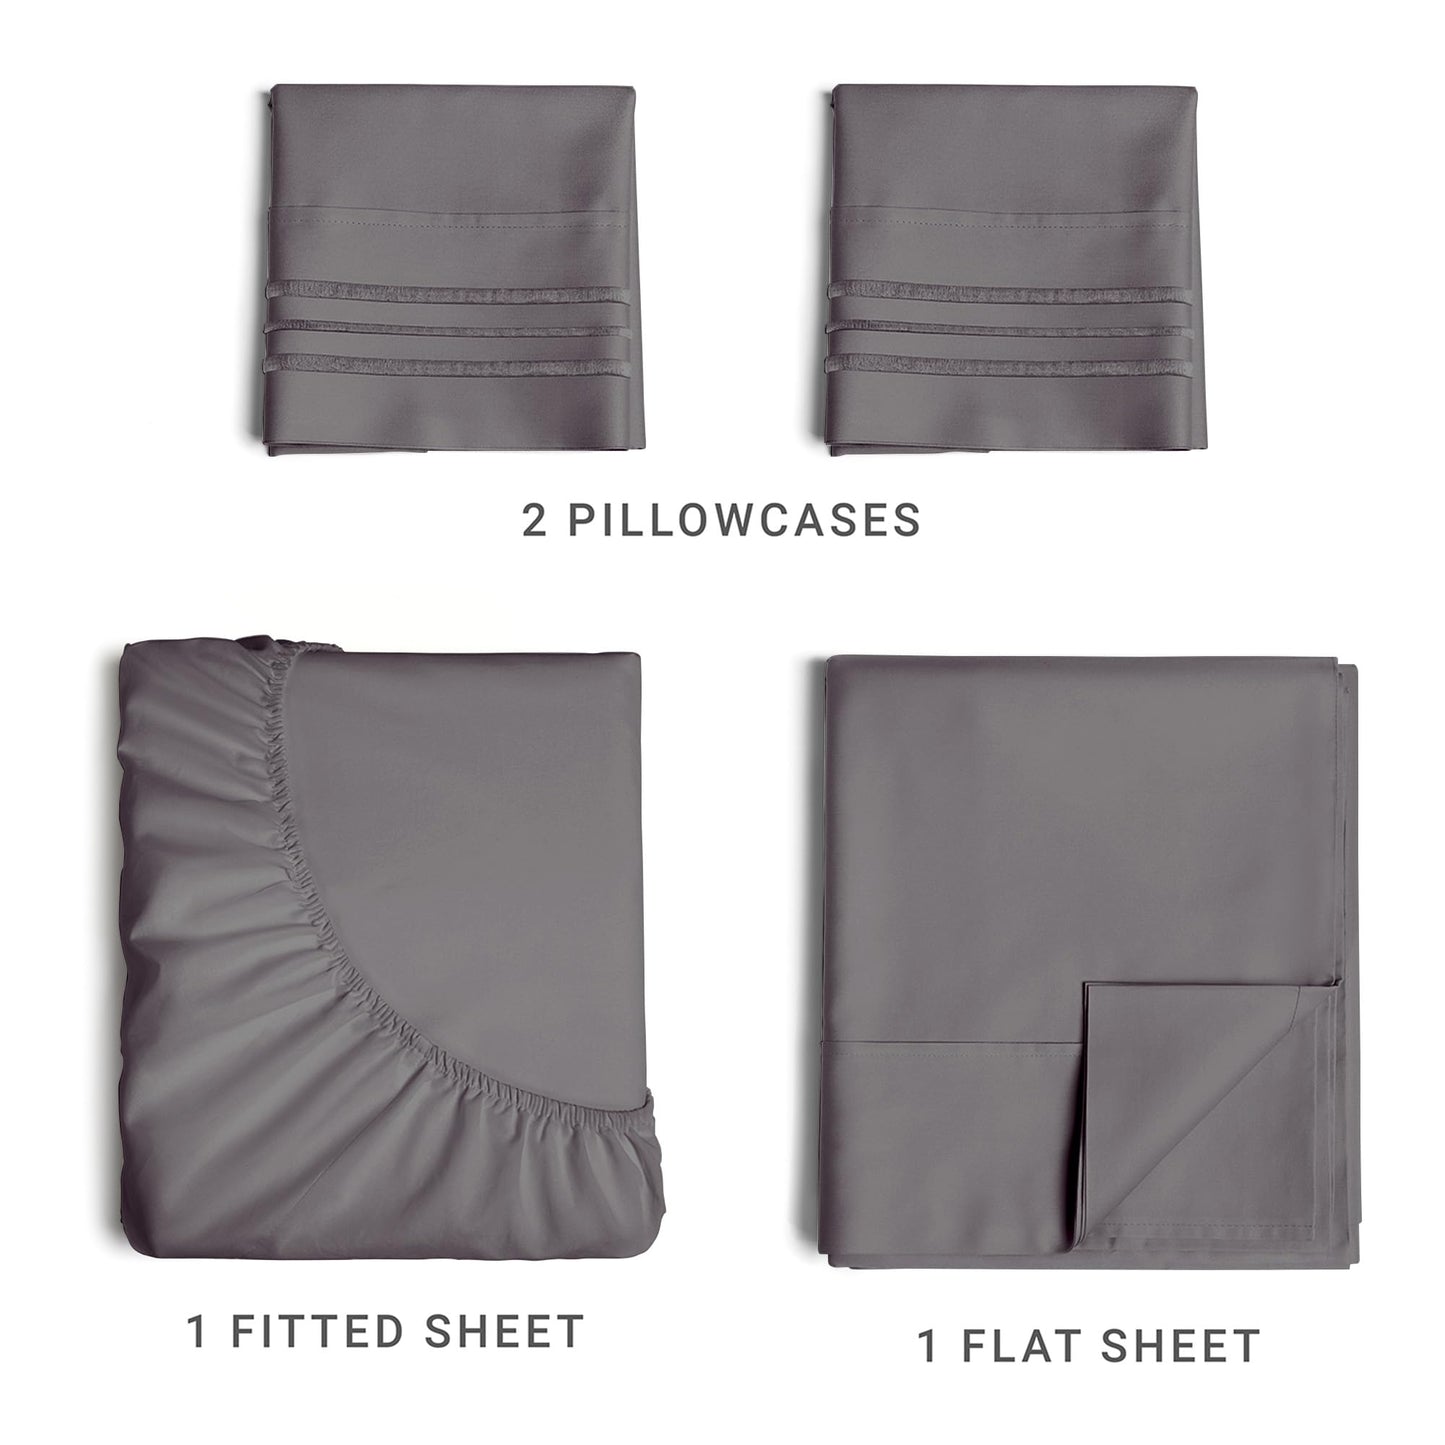 Cal King Size 4 Piece Sheet Set - Comfy Breathable & Cooling Sheets - Hotel Luxury Bed Sheets for Women & Men - Deep Pockets, Easy-Fit, Soft & Wrinkle Free Sheets - Dark Grey Oeko-Tex Bed Sheet Set